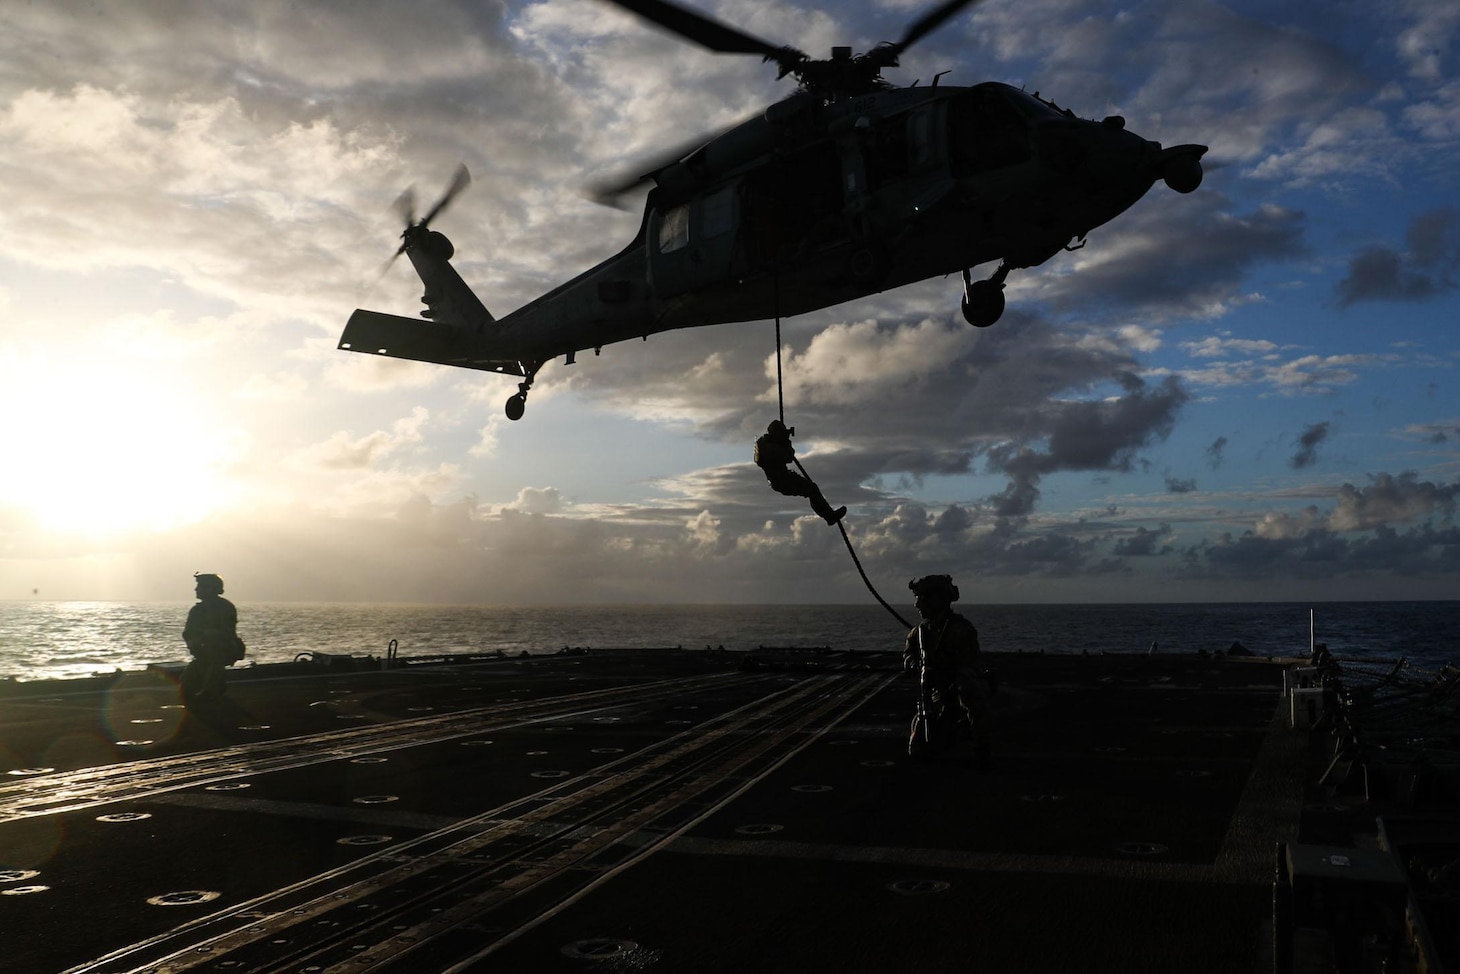 PHILIPPINE SEA (May 11, 2022) Sailors, assigned to Explosive Ordnance Disposal Mobile Unit (EODMU) 3, rope down from an MH-60S Sea Hawk helicopter, assigned to the “Chargers” of Helicopter Sea Combat Squadron (HSC) 14, onto the Ticonderoga-class guided-missile cruiser USS Mobile Bay (CG 53) during a helicopter visit, board, search and seizure (HVBSS) training. Abraham Lincoln Strike Group is on a scheduled deployment in the U.S. 7th Fleet area of operations to enhance interoperability through alliances and partnerships while serving as a ready-response force in support of a free and open Indo-Pacific region. (U.S. Navy photo by Mass Communication Specialist 3rd Class Alonzo Martin-Frazier)